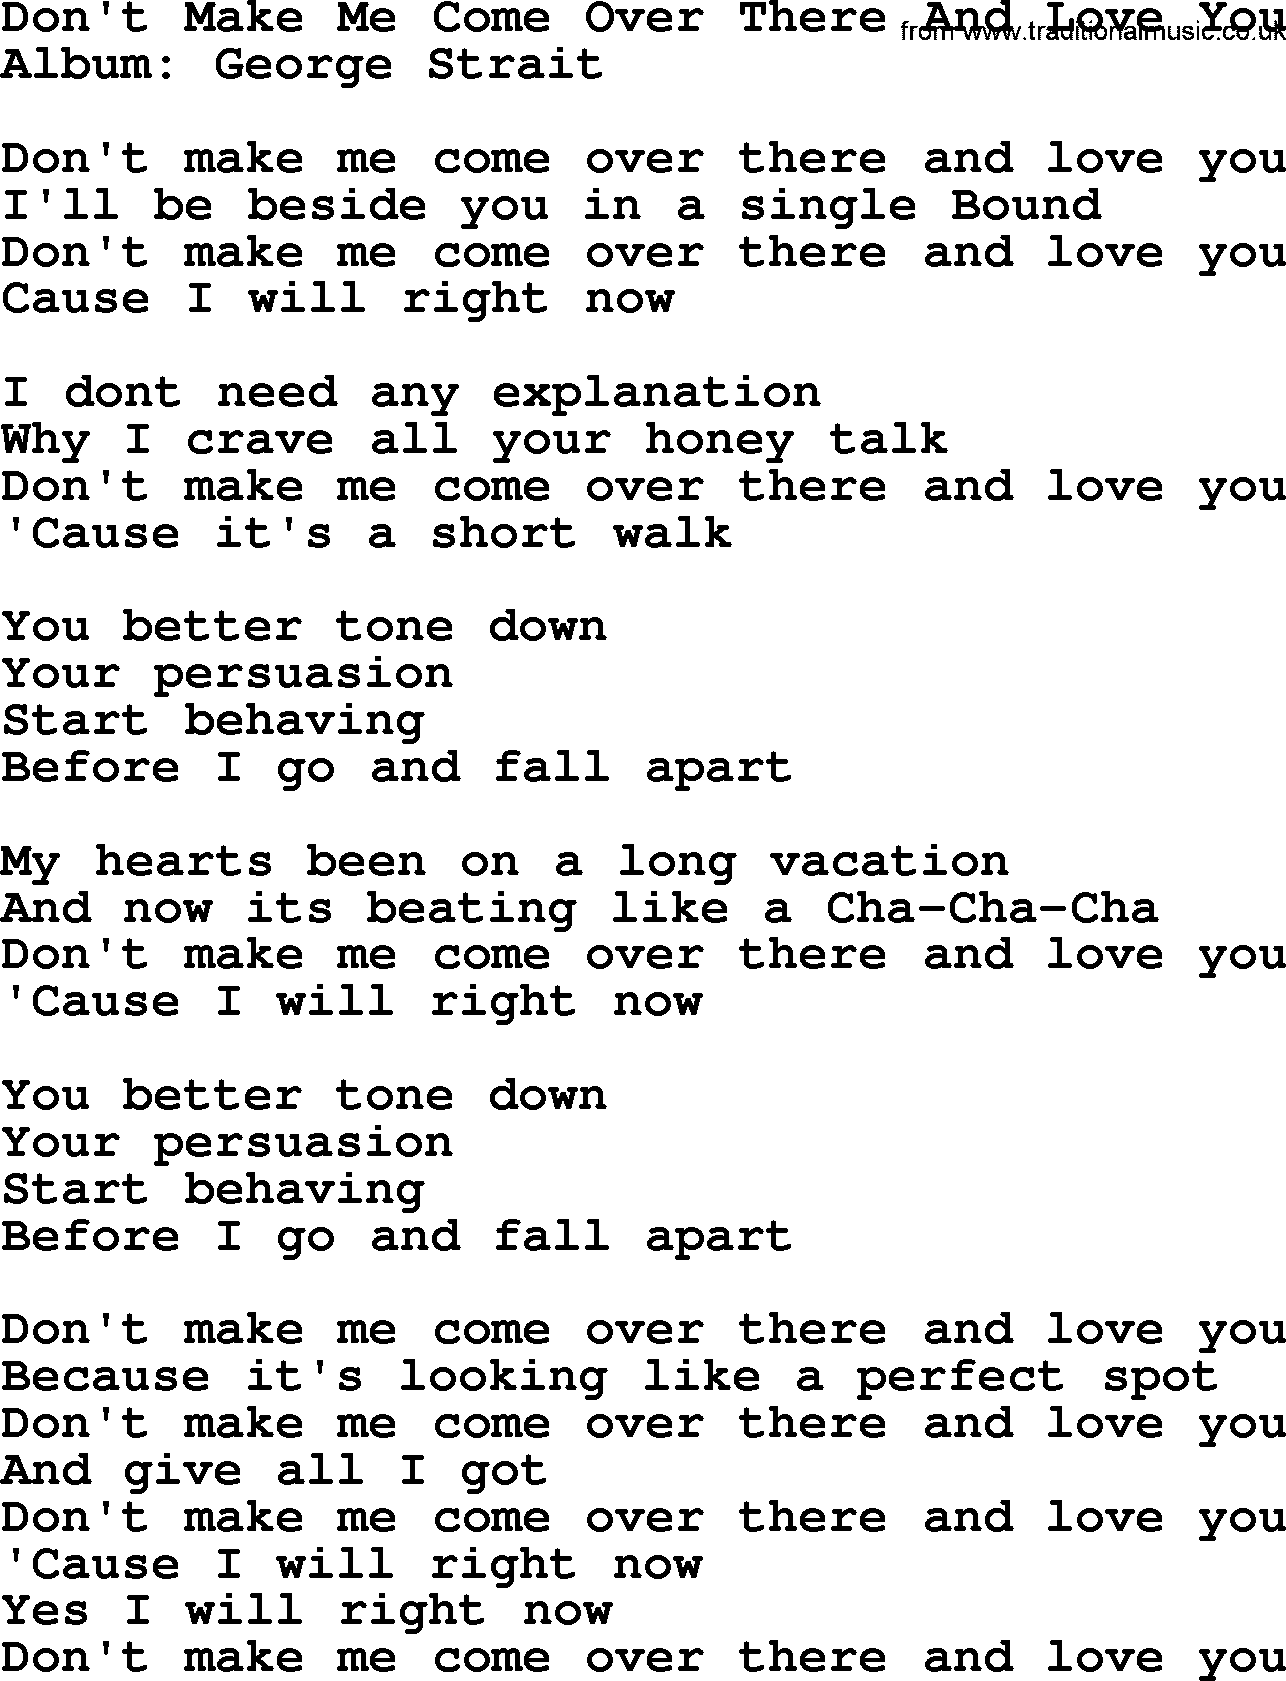 George Strait song: Don't Make Me Come Over There And Love You, lyrics